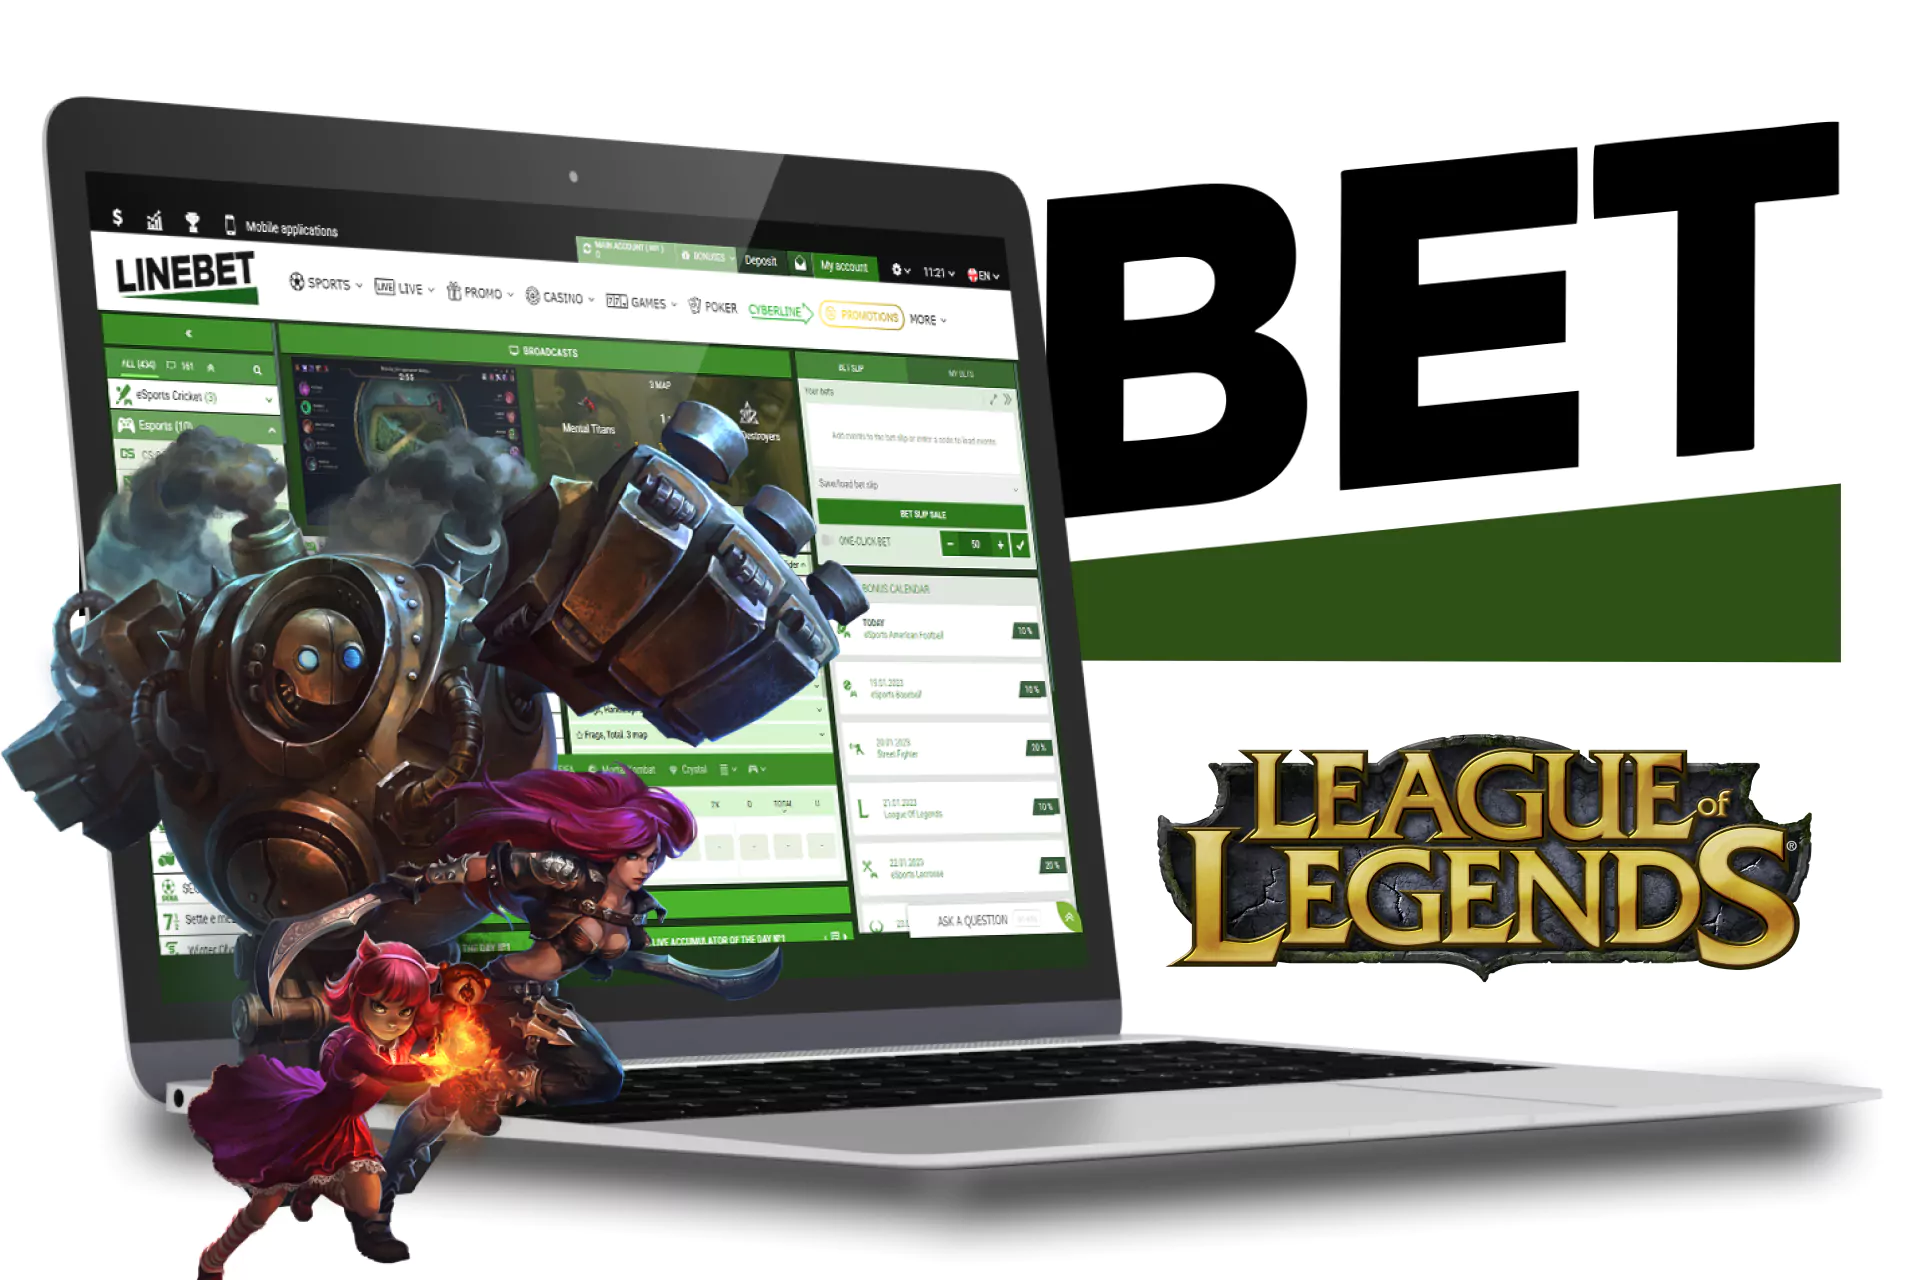 Take just a couple of steps to start betting on League of Legends on Linebet.